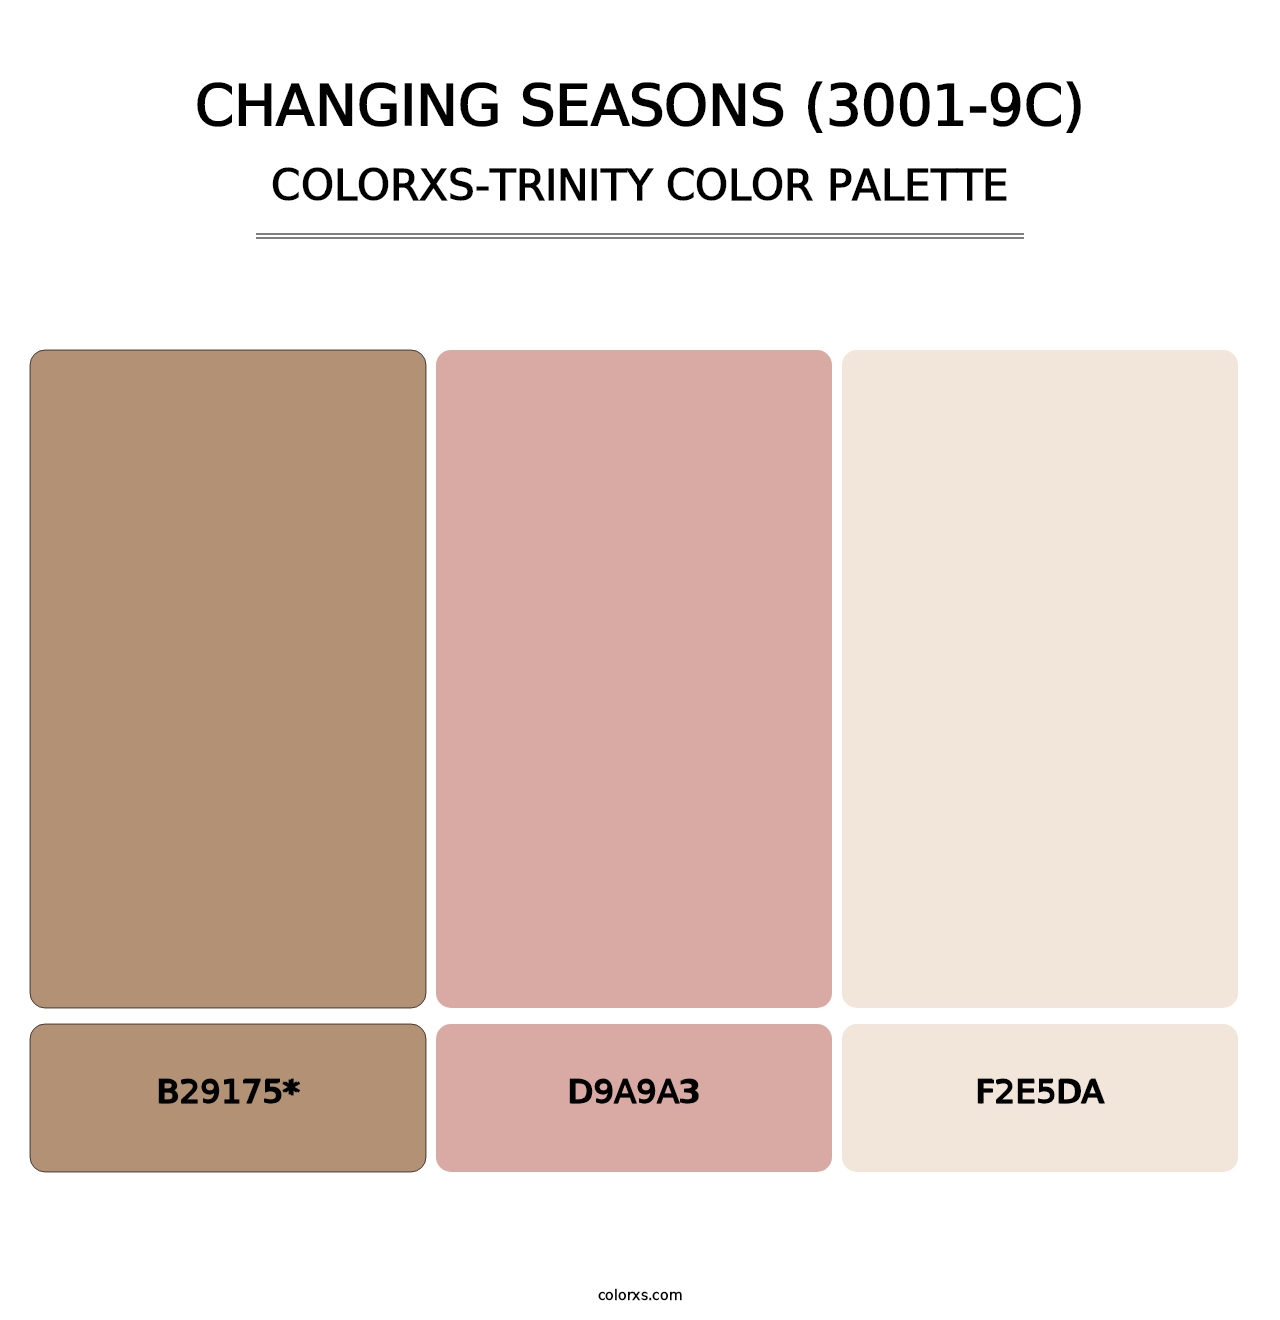 Changing Seasons (3001-9C) - Colorxs Trinity Palette